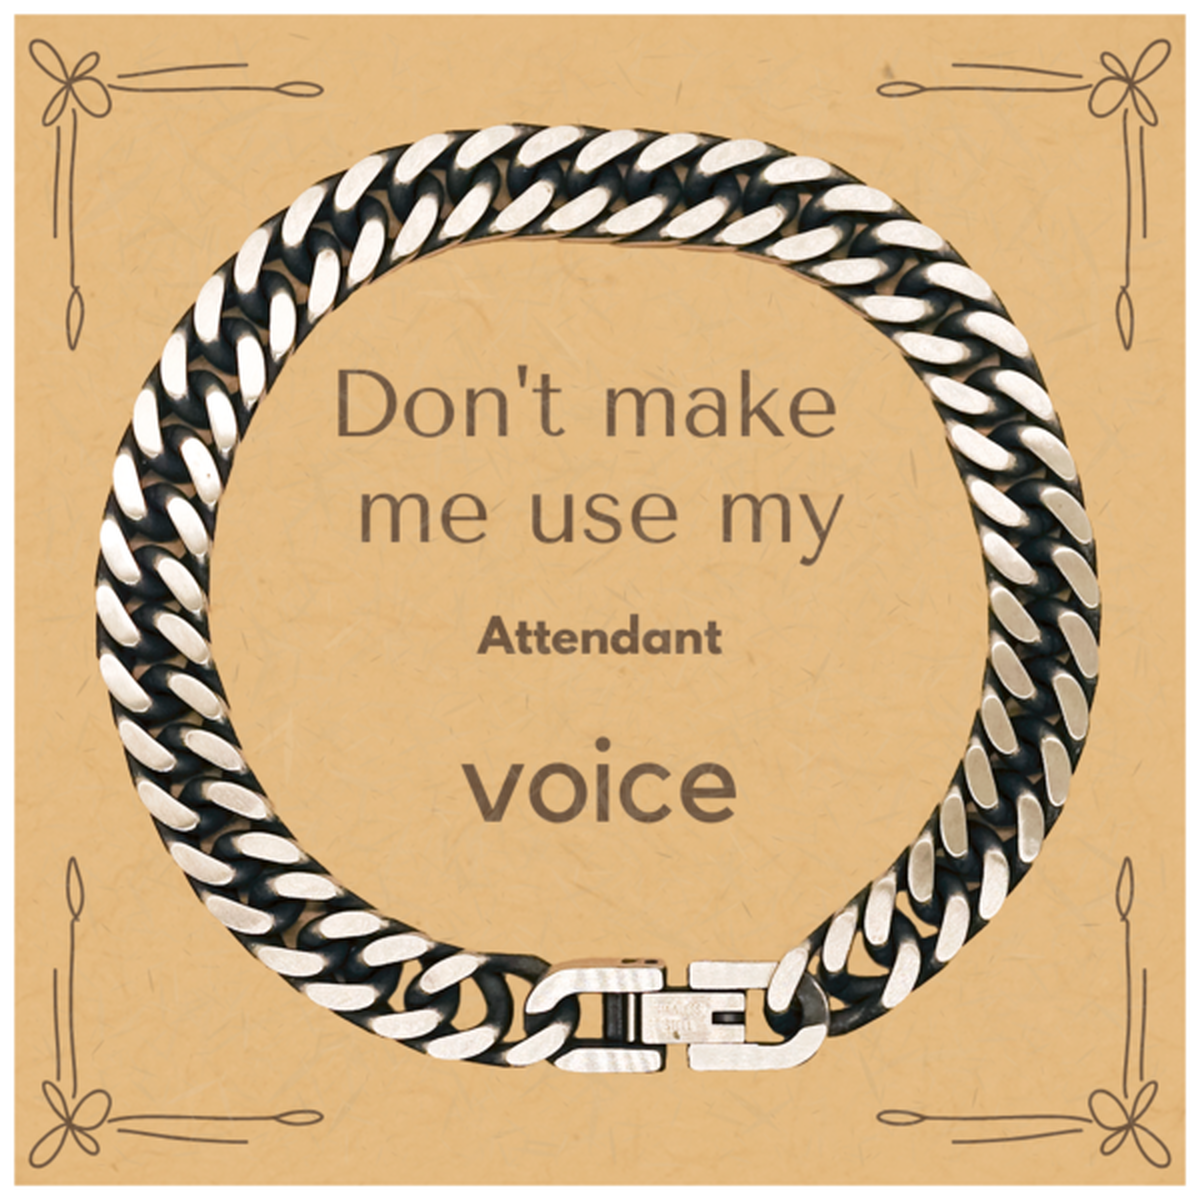 Don't make me use my Attendant voice, Sarcasm Attendant Card Gifts, Christmas Attendant Cuban Link Chain Bracelet Birthday Unique Gifts For Attendant Coworkers, Men, Women, Colleague, Friends